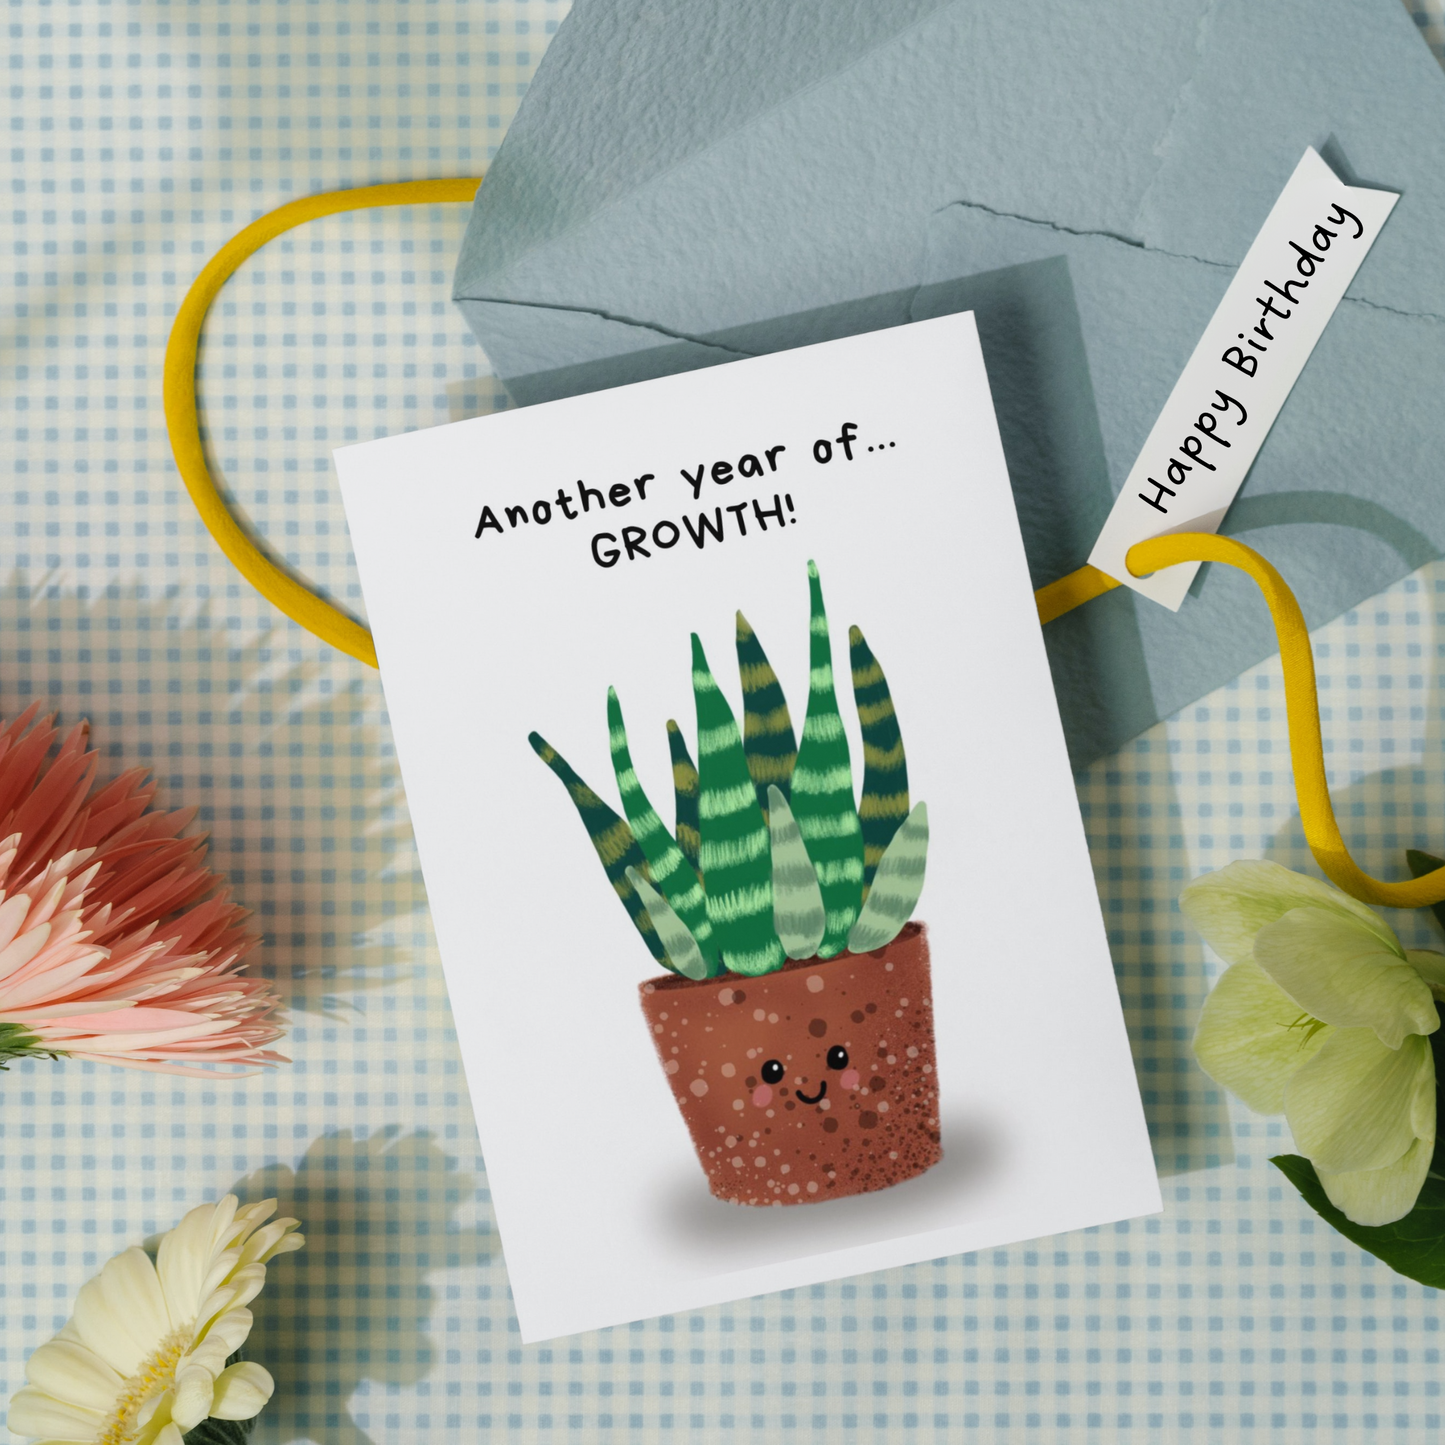 Birthday Card: Another Year of Growth!